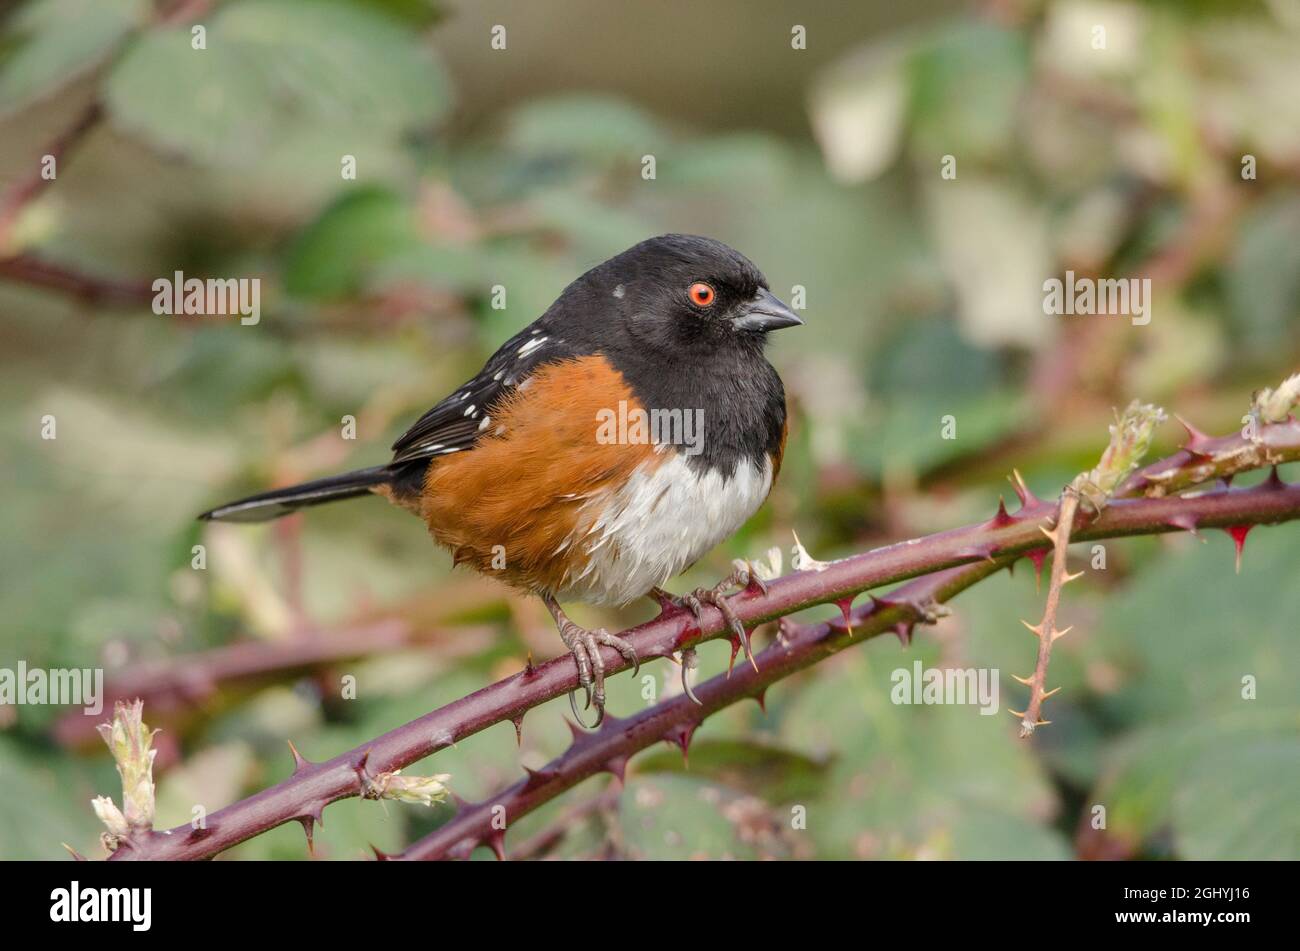 An adult male Spotted Towhee sits perched on invasive Himalayan blackberry vines in a park in Redmond, Washington. Stock Photo